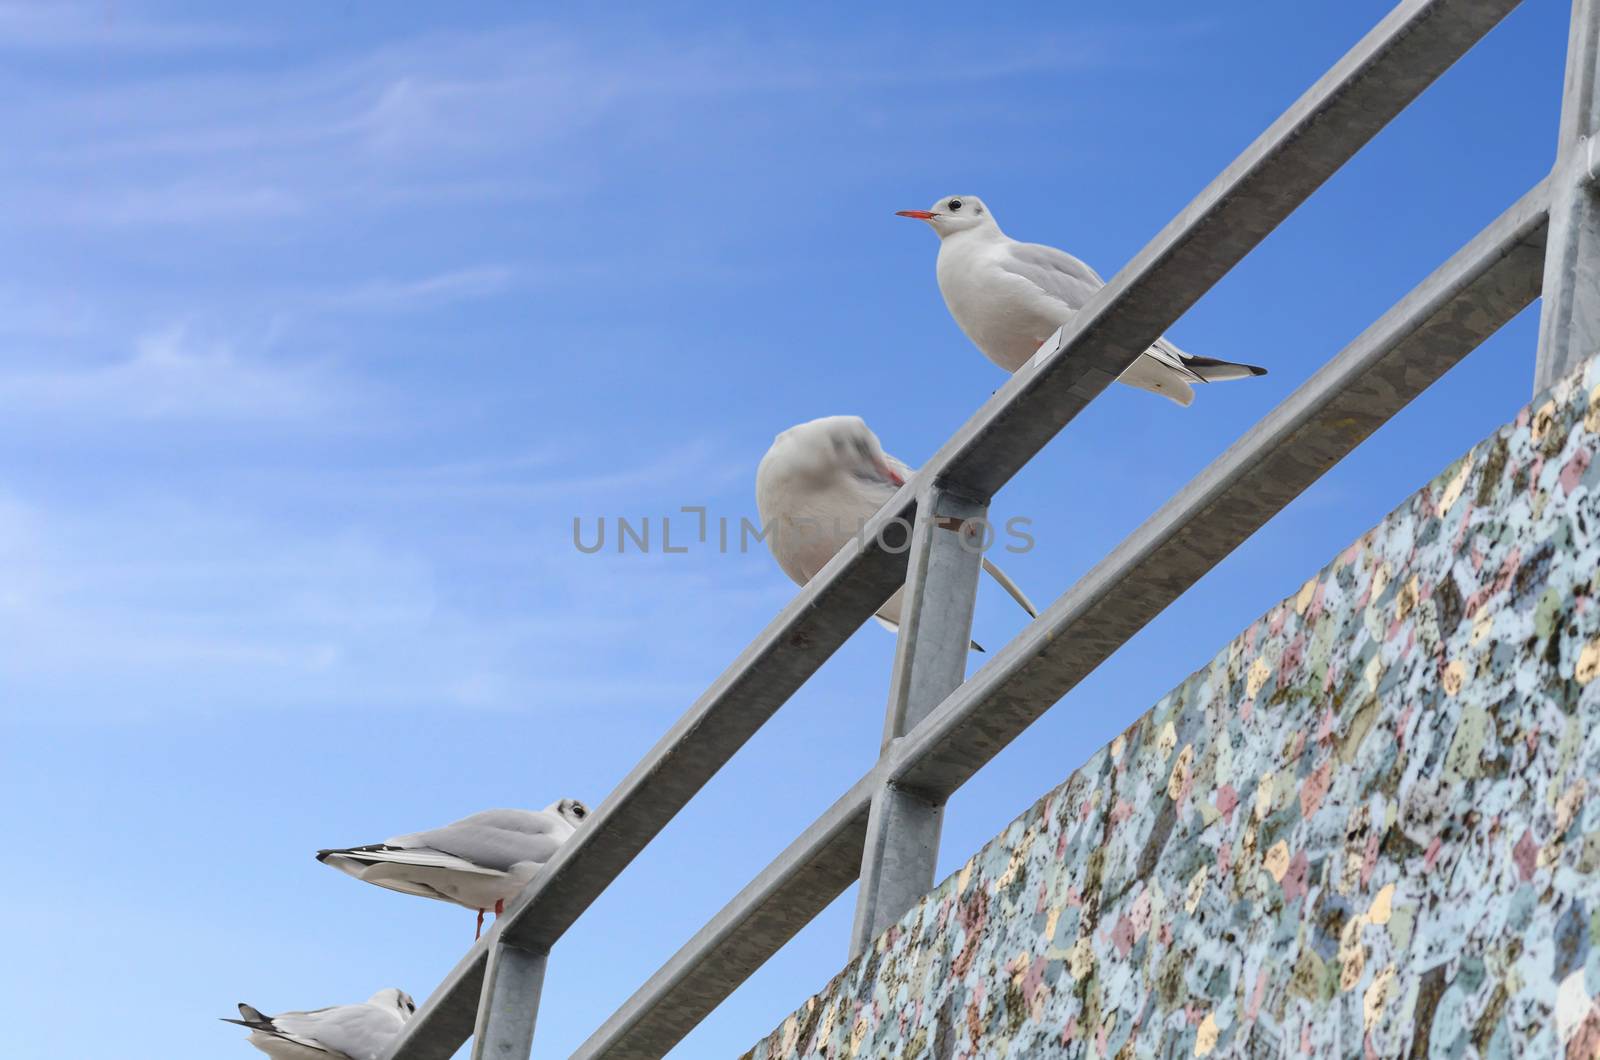 Four seagulls on railing on background of blue sky.